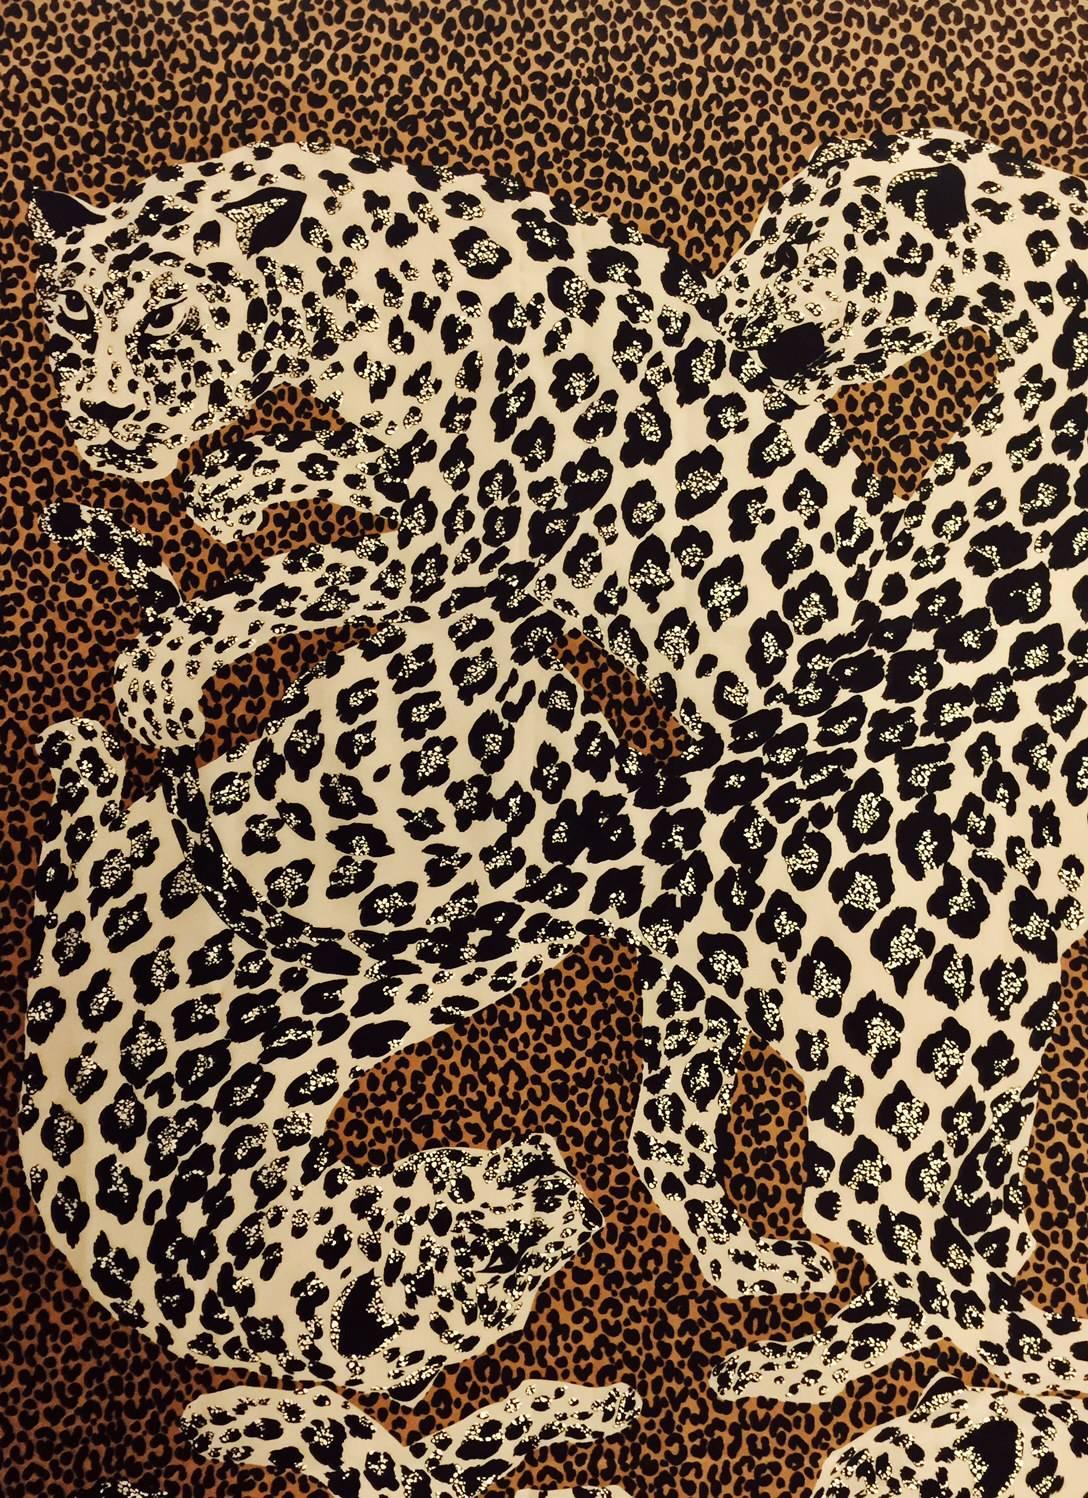 The world renowned house of Yves Saint Laurent impeccably created this foulard for those with discerning taste and a craving for animal prints.  This 12 leopard scarf/shawl is highly desired and crafted in Italy from 100% silk with 4 hand rolled